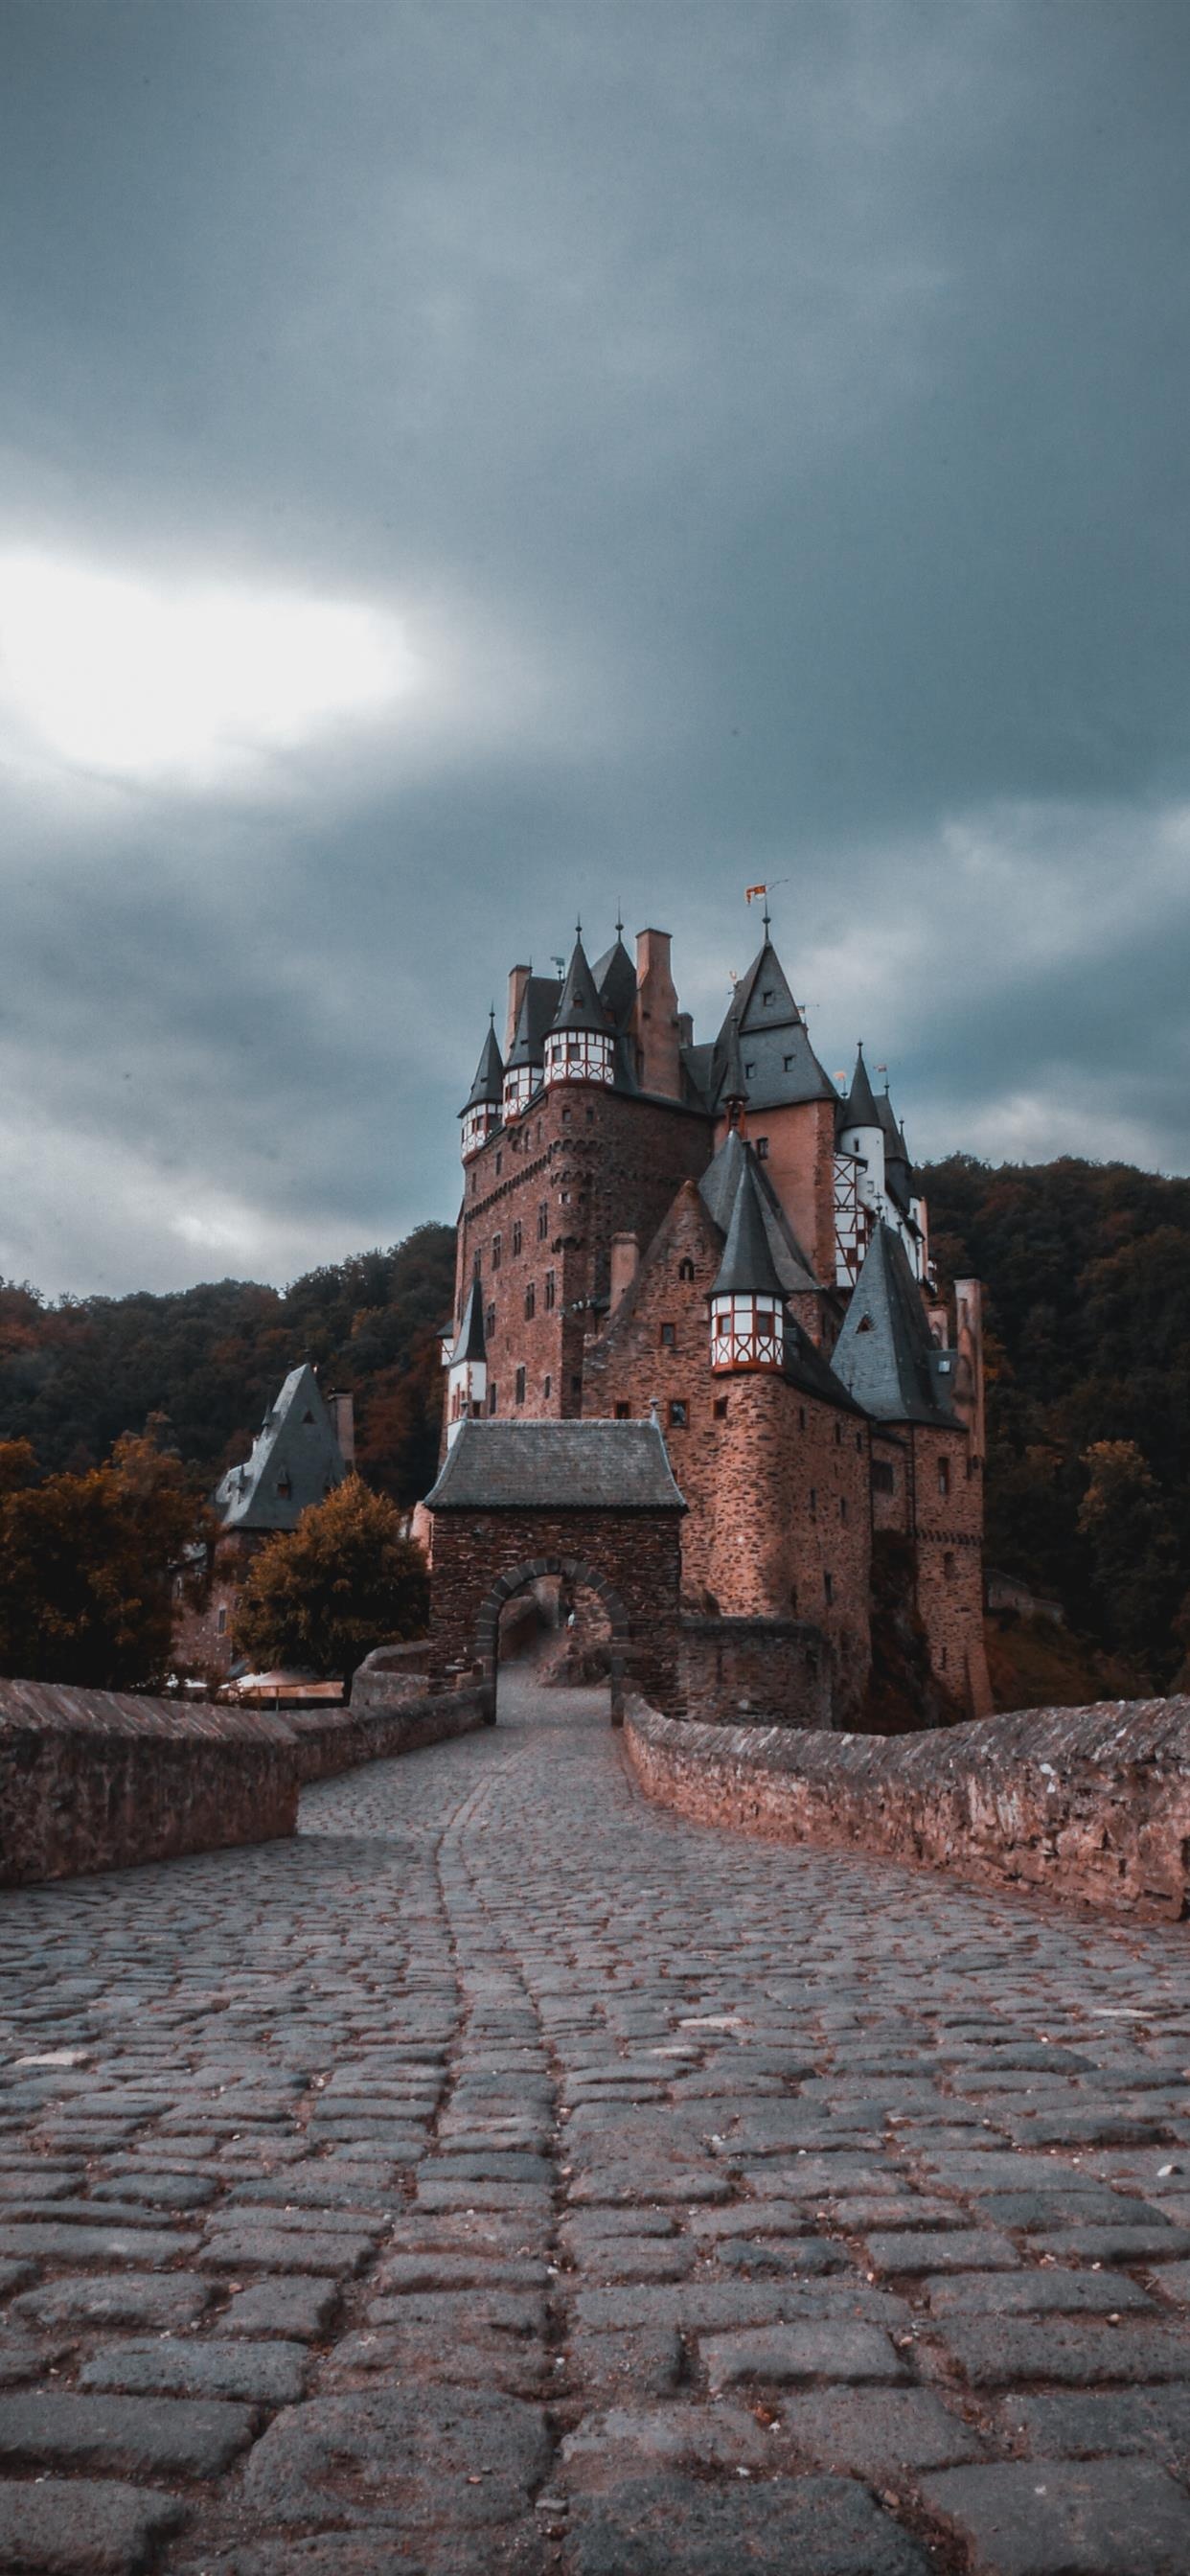 Castle: Burg Eltz, A medieval palace nestled in the hills above the Moselle between Koblenz and Trier, Germany. 1250x2690 HD Wallpaper.